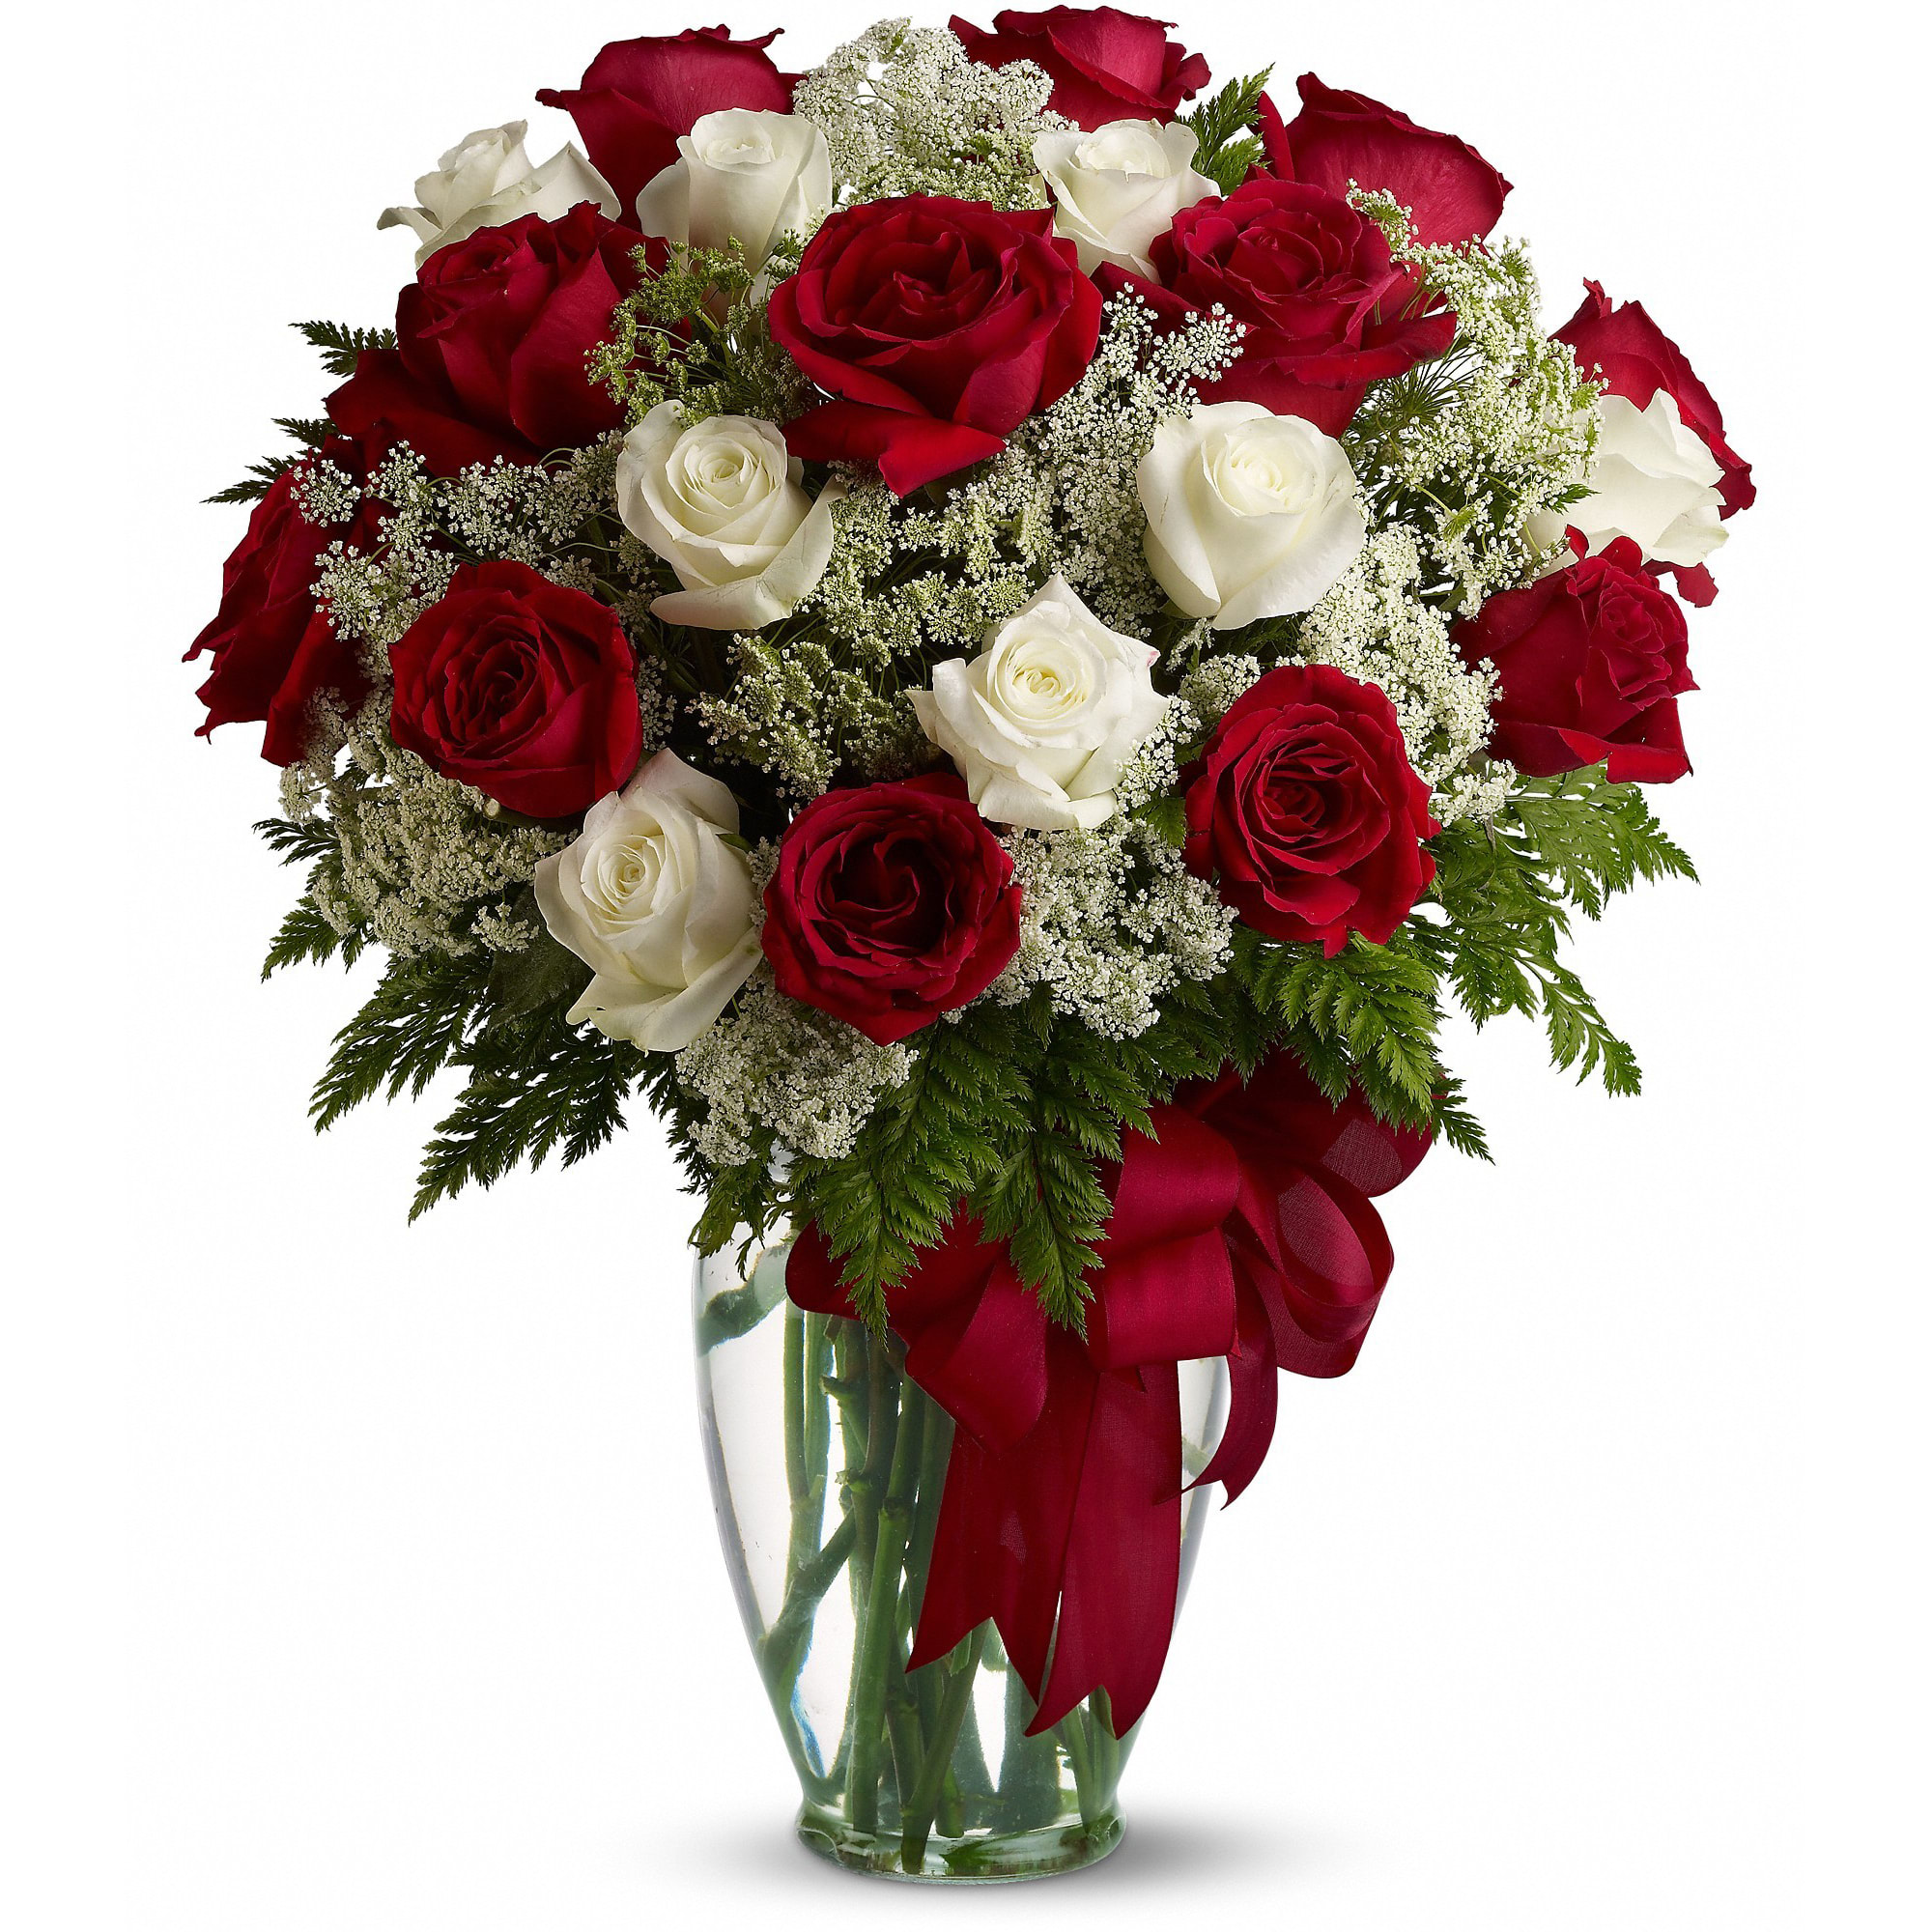 All my love for you  - 2 dozen roses Love's divine, and roses are too. At almost two feet tall, this beautiful mix of red and white roses - accented with Queen Anne's Lace, and 0r million star adorned with a bold red ribbon - is a timeless gift for your beloved.  Red and white roses accented with Queen Anne's lace and more are delivered in a glass vase accented with a red satin ribbon.  Approximately 18&quot; W x 23&quot; H  Orientation: All-Around      As Shown : T11Z101A     Deluxe : T11Z101B     Premium : T11Z101C  